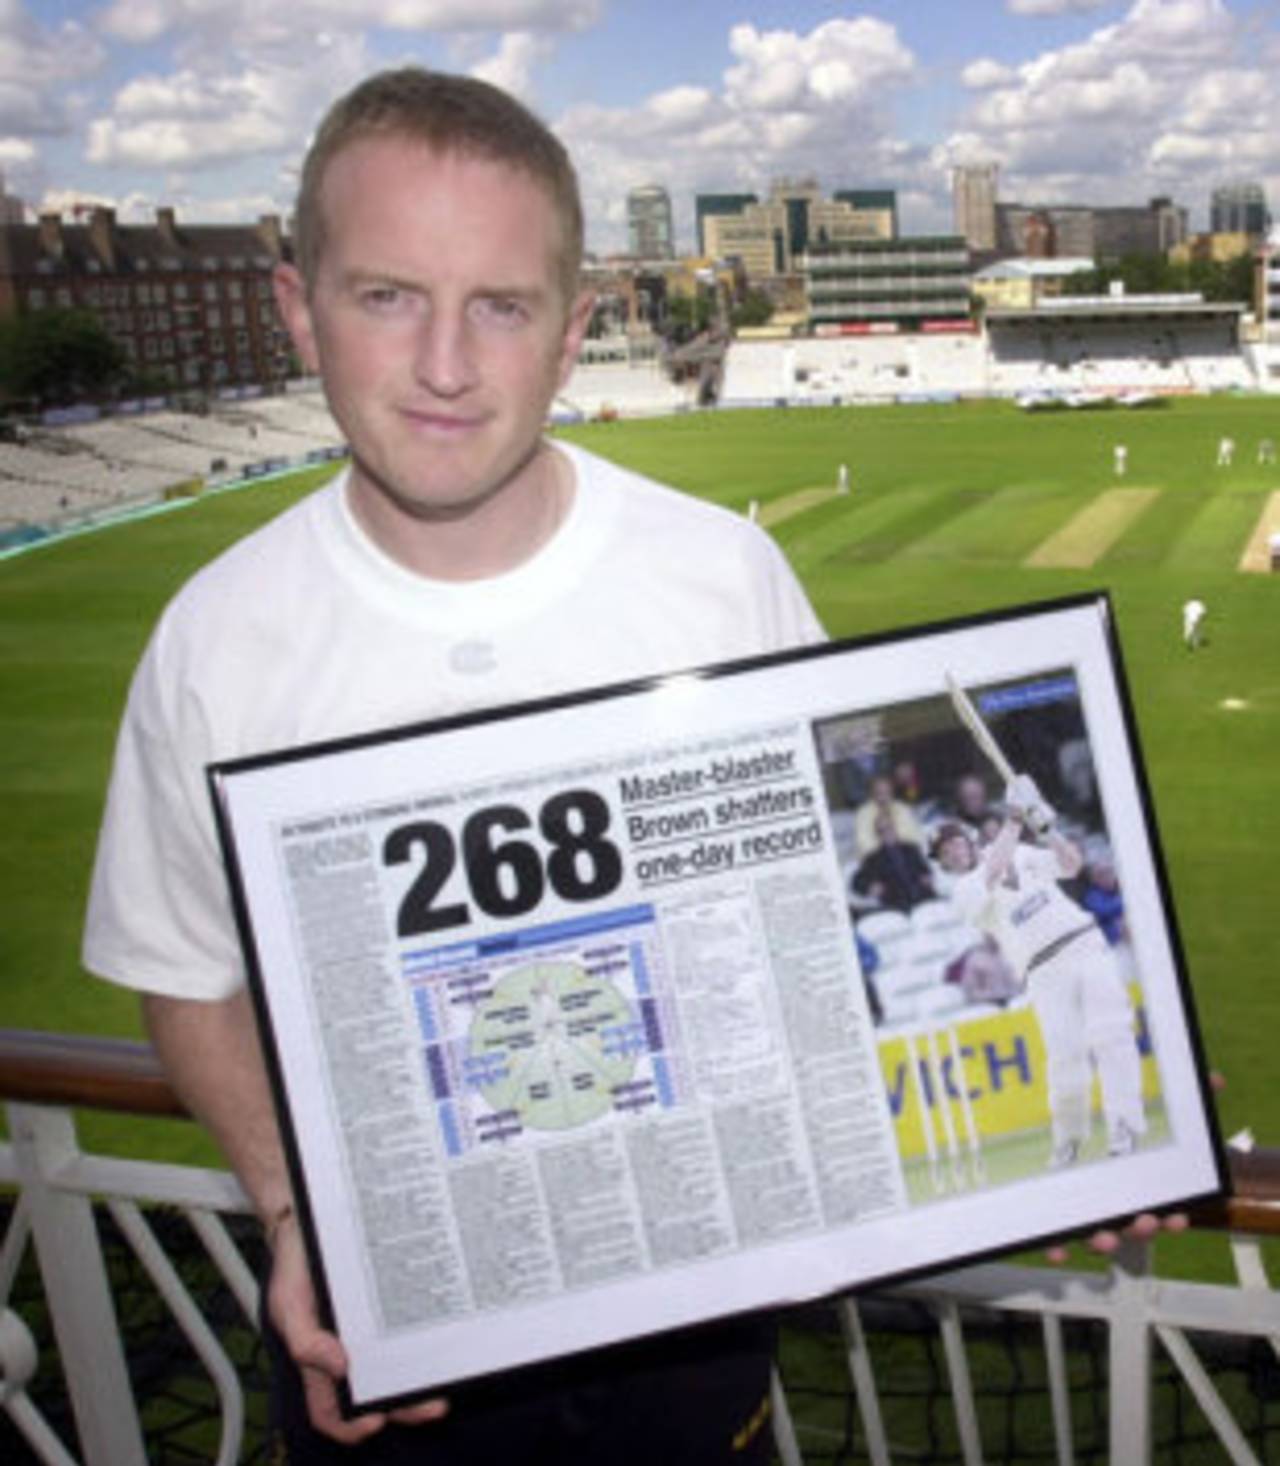 Pat Pilton of The Press Association presented Surrey opener Alistair Brown, with a framed picture to commemmorate his world record breaking 268 v Glamorgan, the highest innings for a one day game. * The picture, mocked up as a newspaper page, details a ball-by-ball account of his innings, as gathered by PA during the match. Commenting as he received the award Alistair Brown said " It was the best innings I have ever played. Yes, it was a short boundary that day, but my pull shots were landing in the road. What pleased me most was my drives. The timing was perfect. I felt very good - it was just one of those days. " I don't think my record score will ever be surpassed." Alistair Brown's innings included 12 sixes and 30 fours and came from 160 balls in 199 minutes, July 11, 2002